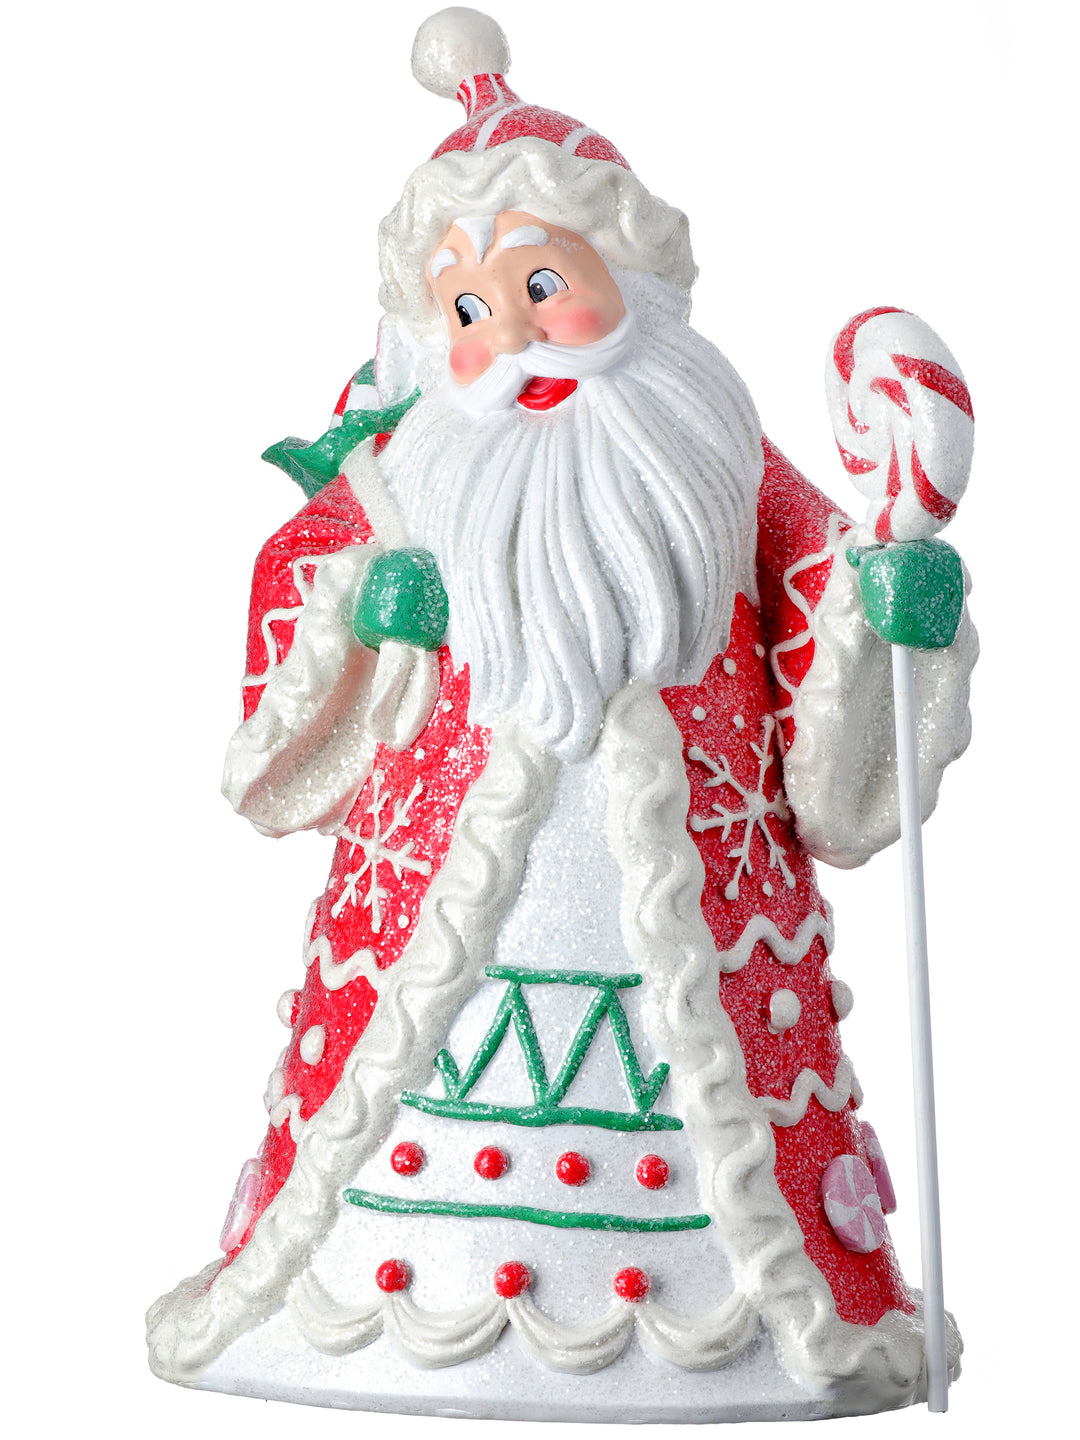 18" Resin Candylicious Santa with Lollipop in Red, White and Green